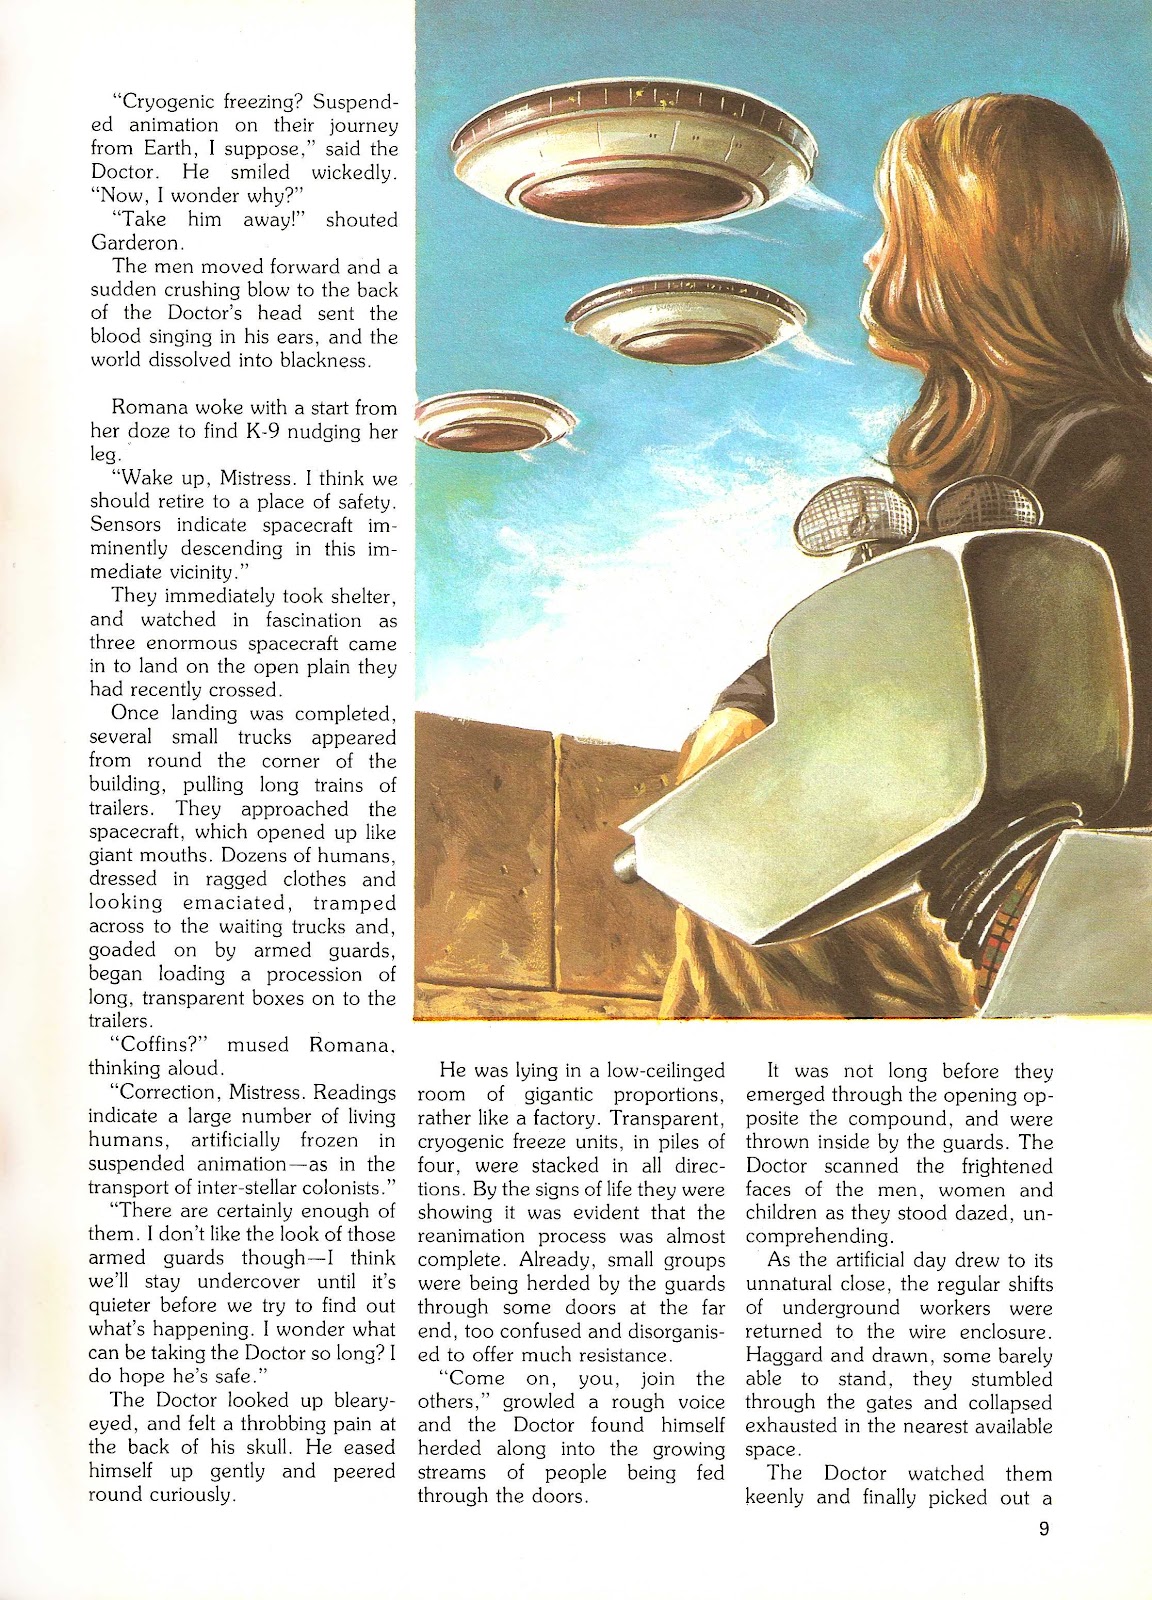 Doctor Who Annual issue 1981 - Page 8